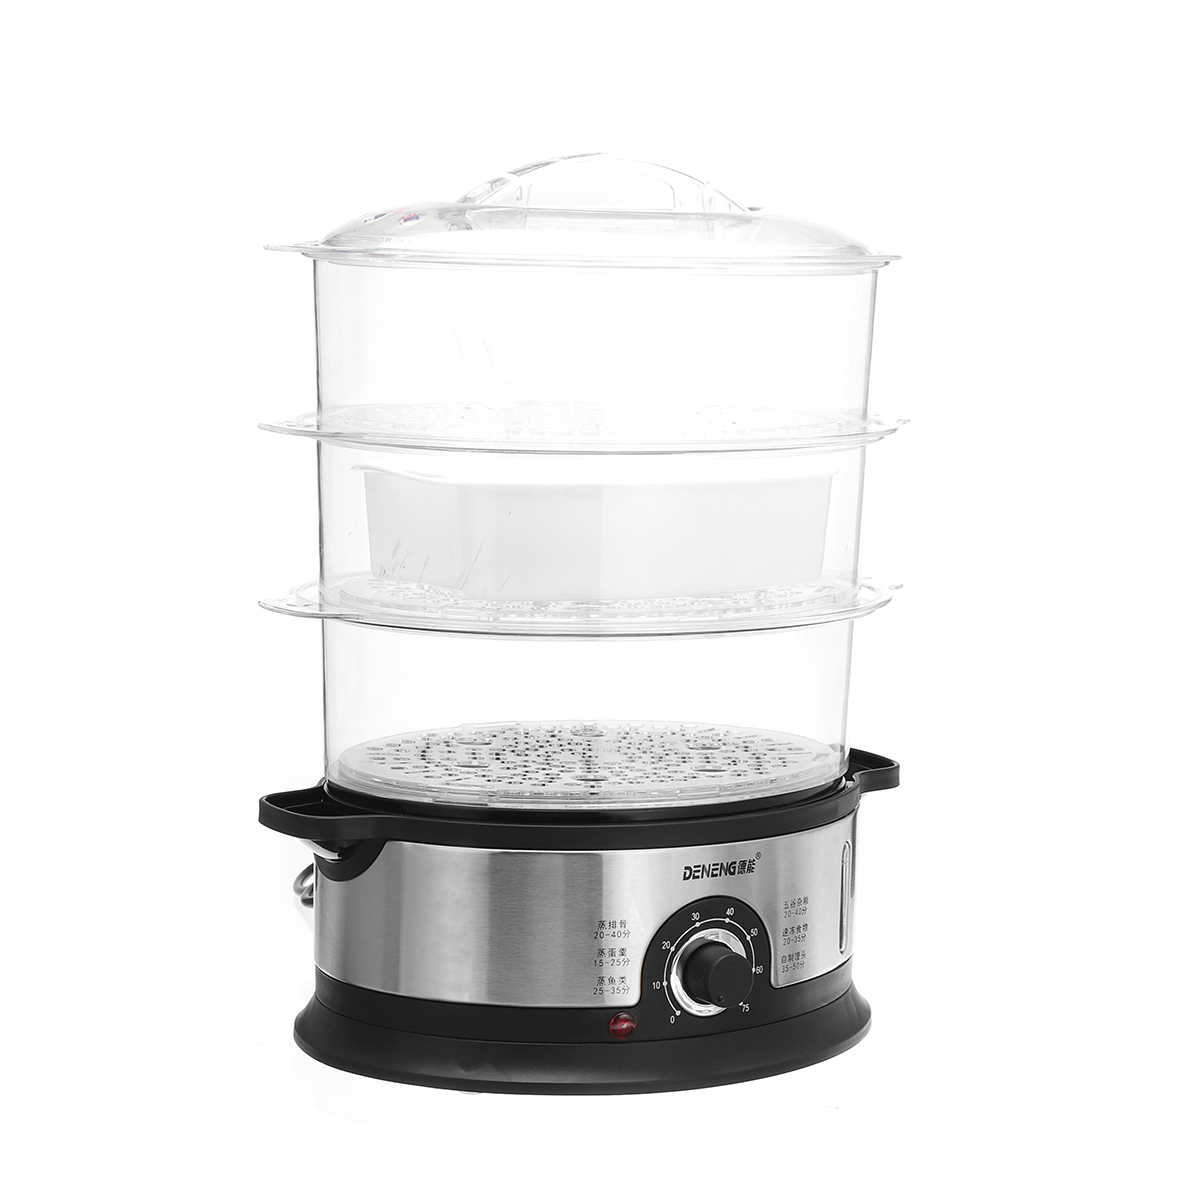 

220V 800W 3 Tier Electric Food Steamer Timing Home Kitchen Fish Cooking Machine